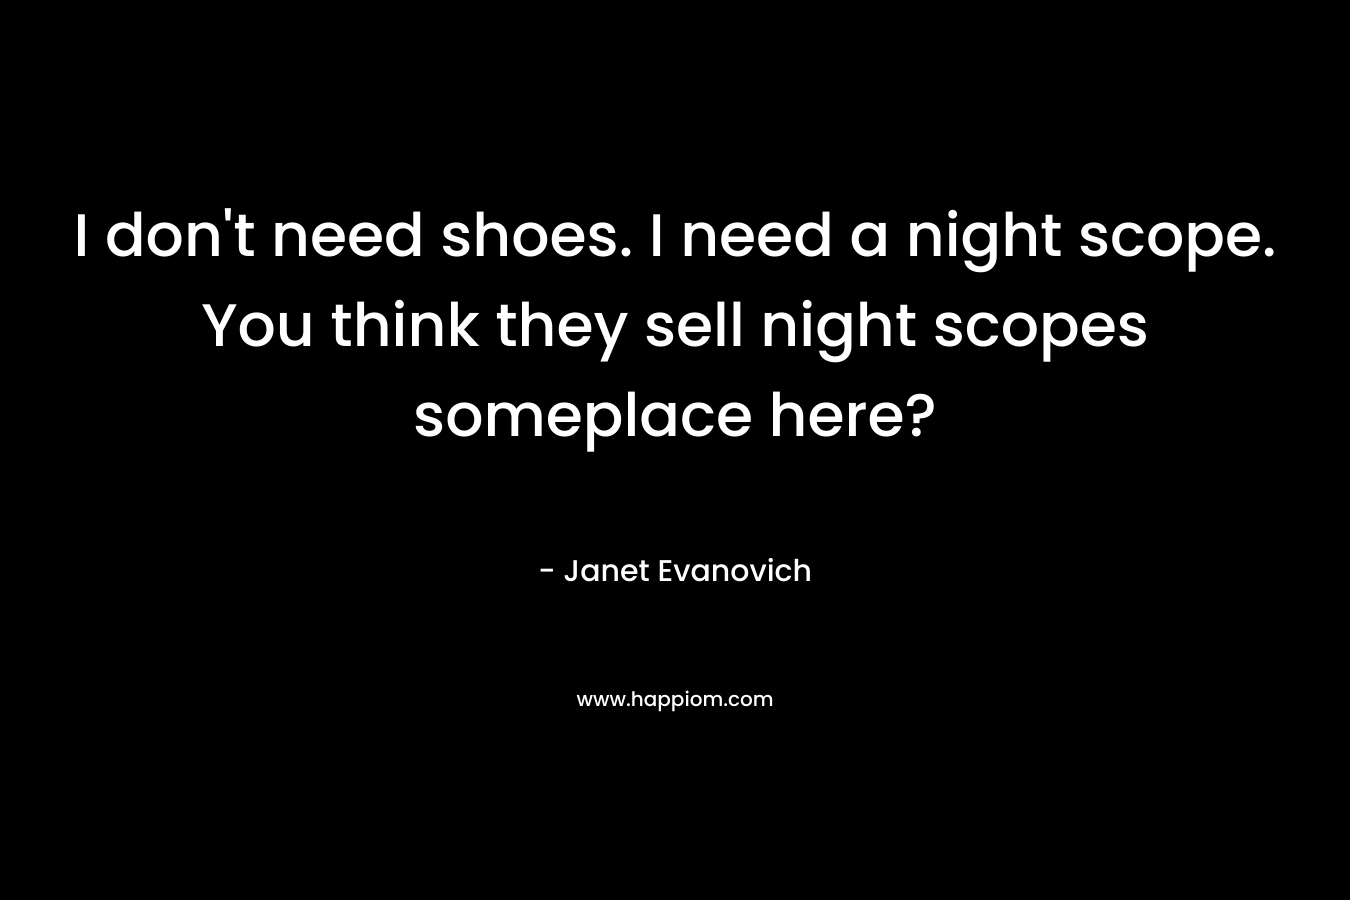 I don't need shoes. I need a night scope. You think they sell night scopes someplace here?